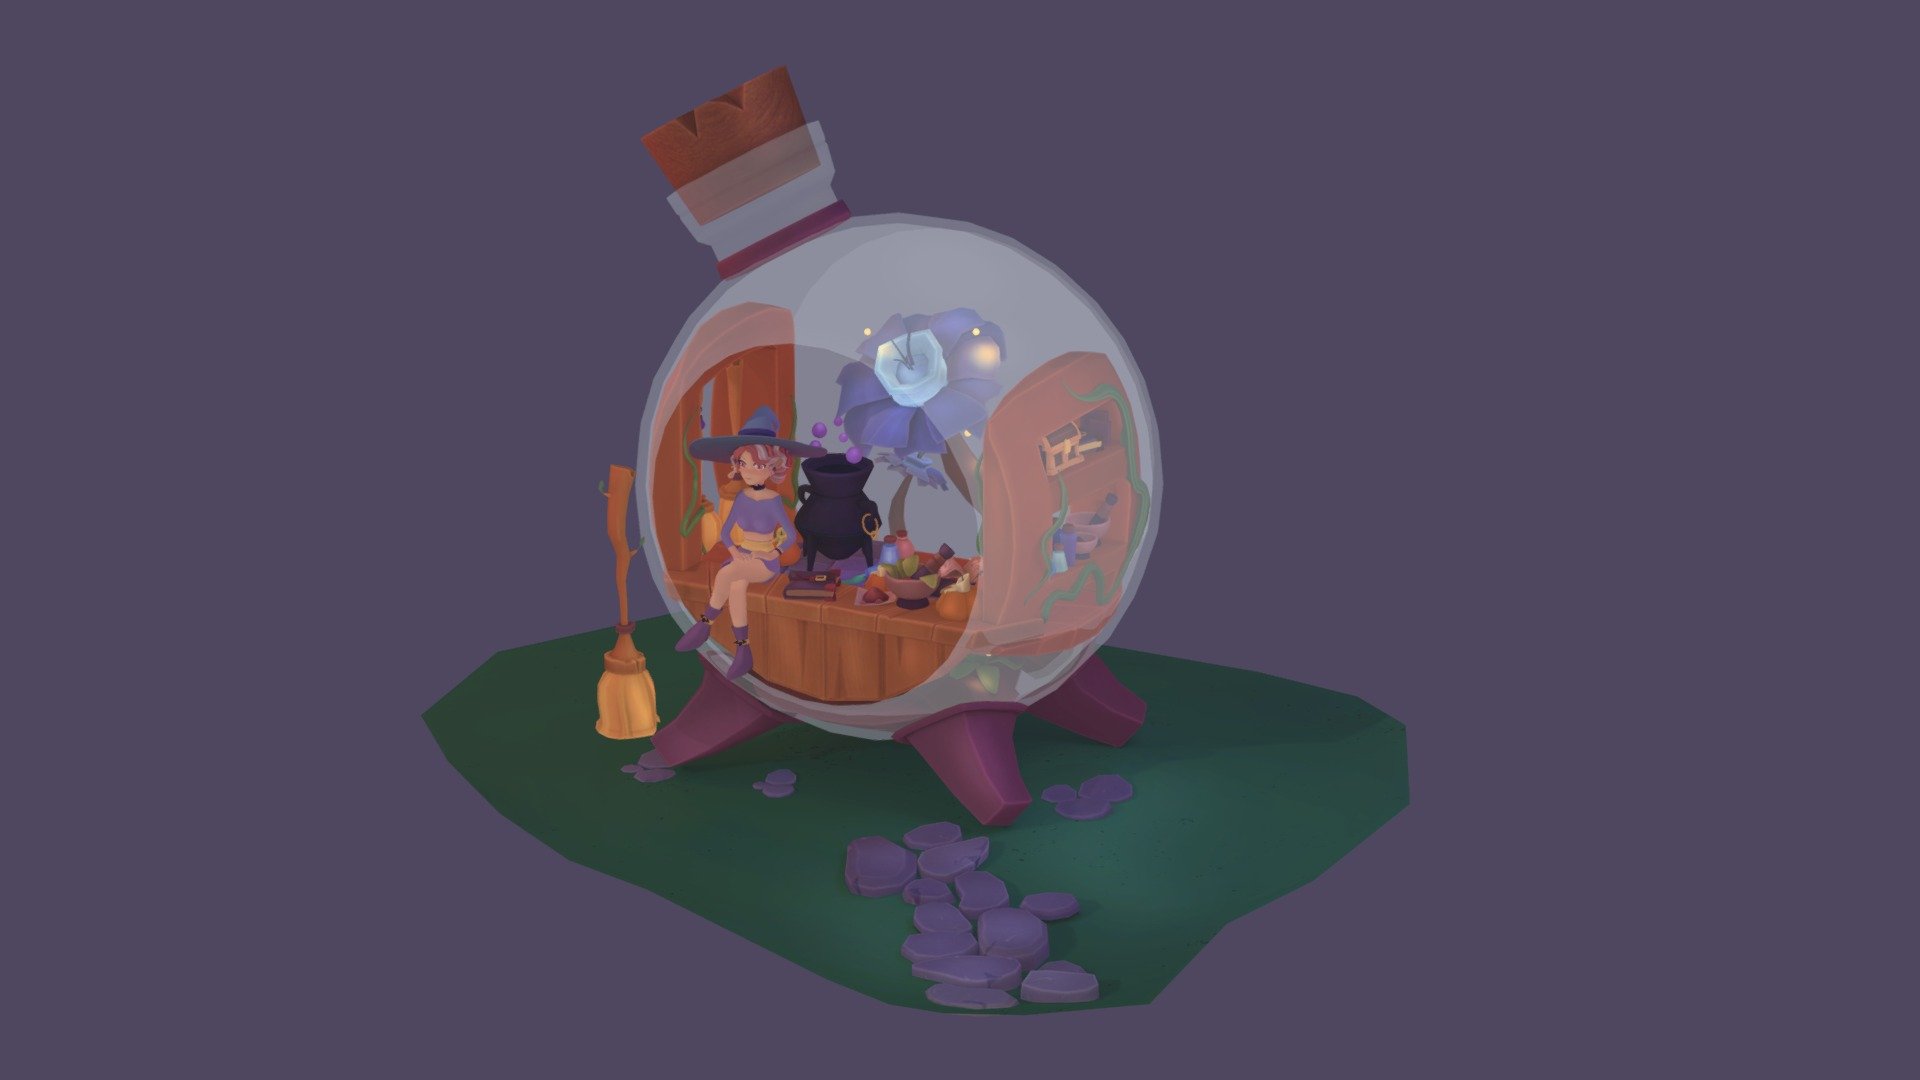 It's a cute magical bottle known as the Magic Shop. 
The Blender simulation software was used. 
Texture painted in 3D Coat, SubstancePainter, Photoshop (HandPaint)
This is a scene made for Halloween 2022 3d model